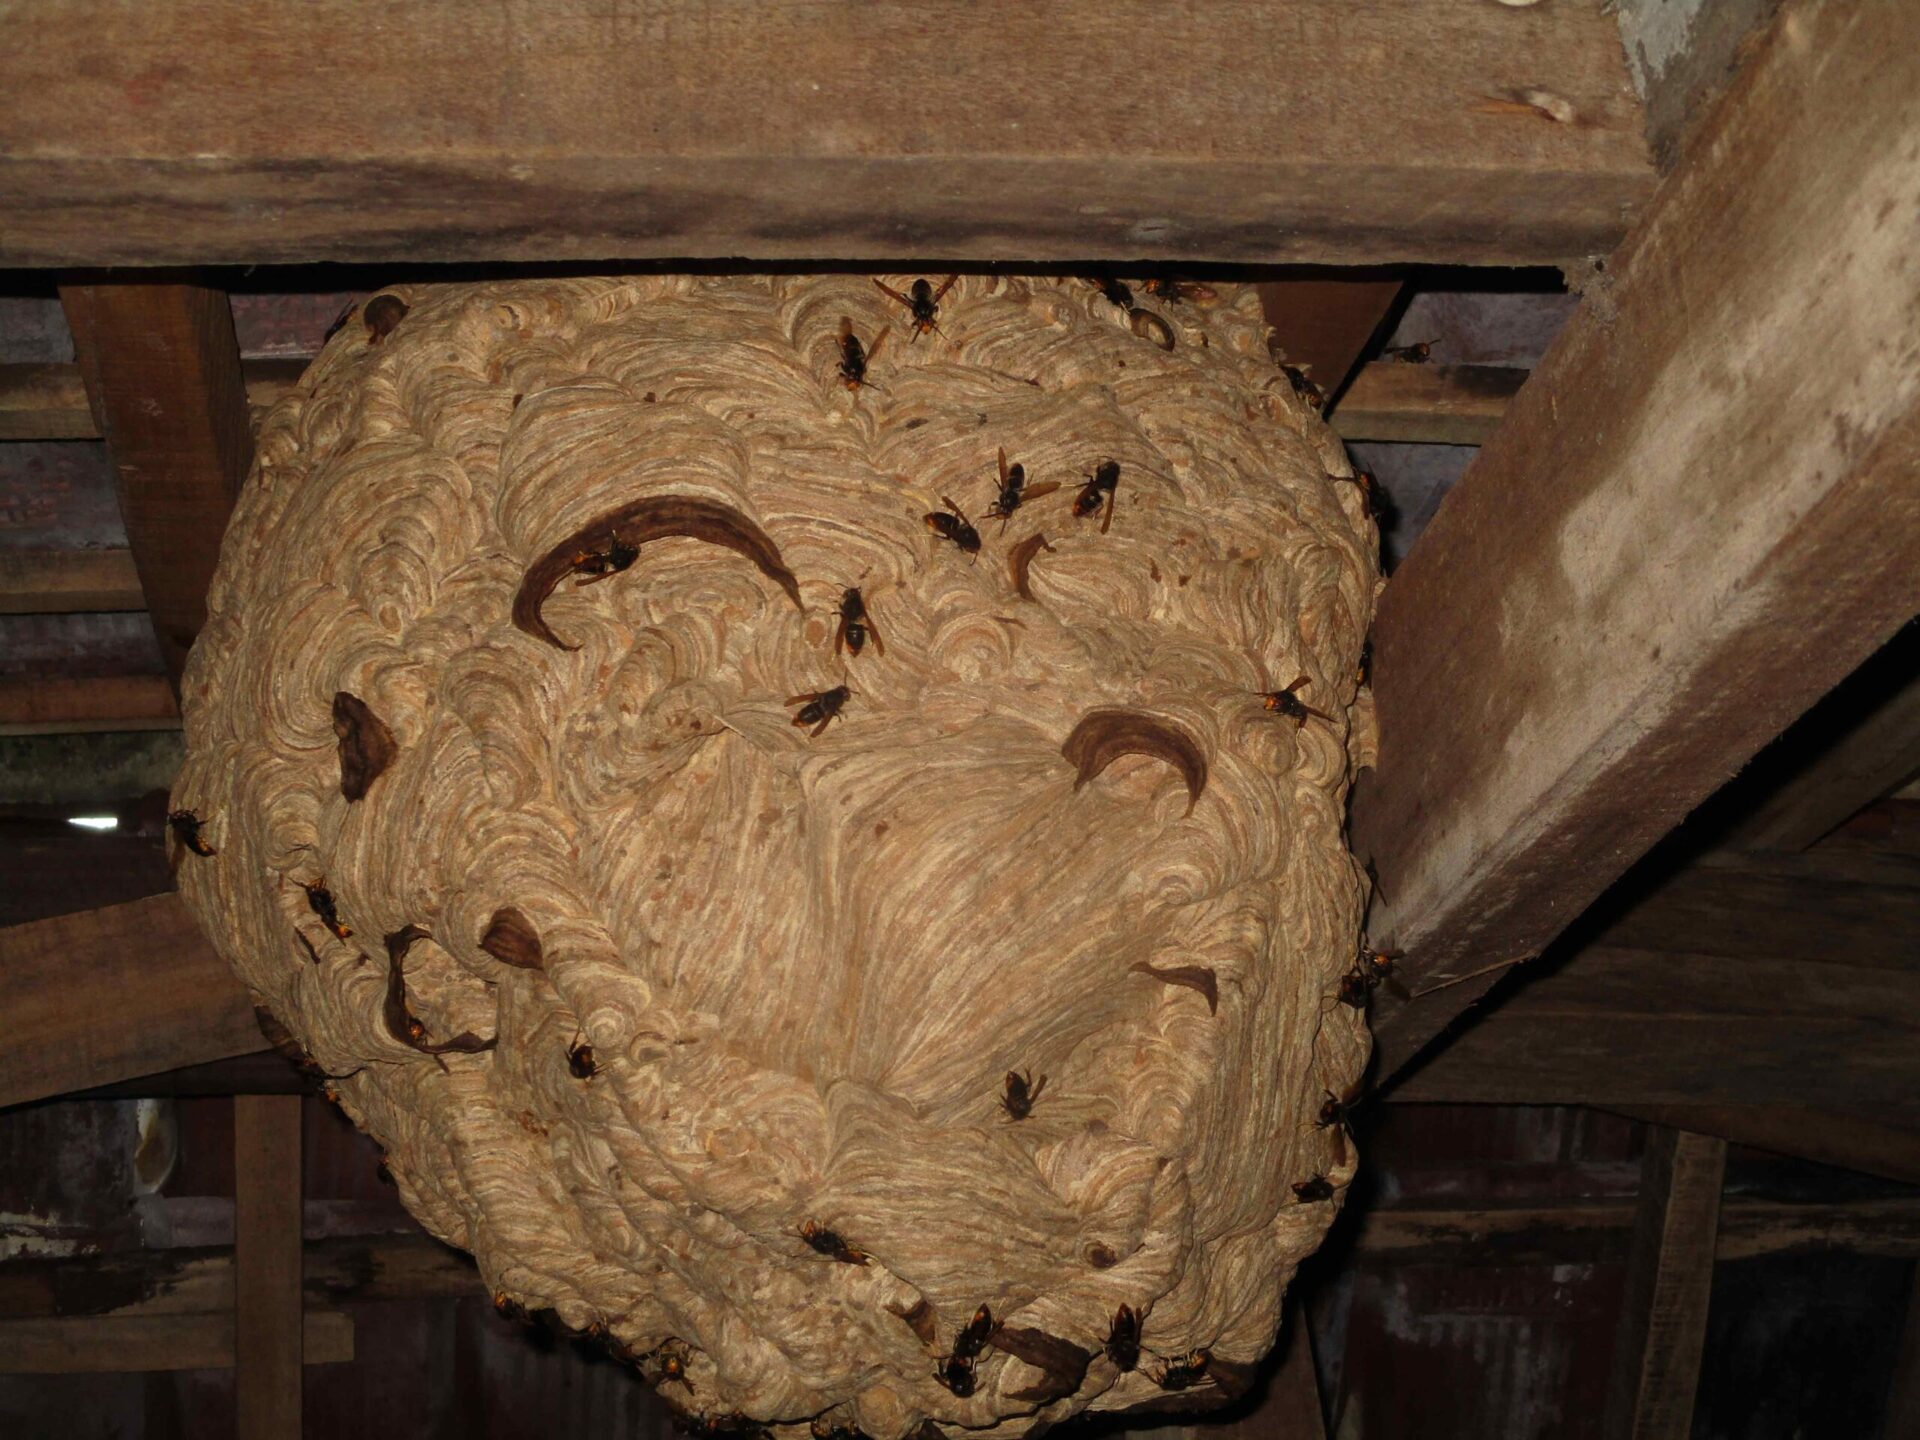 Wasp nest on ceiling of house